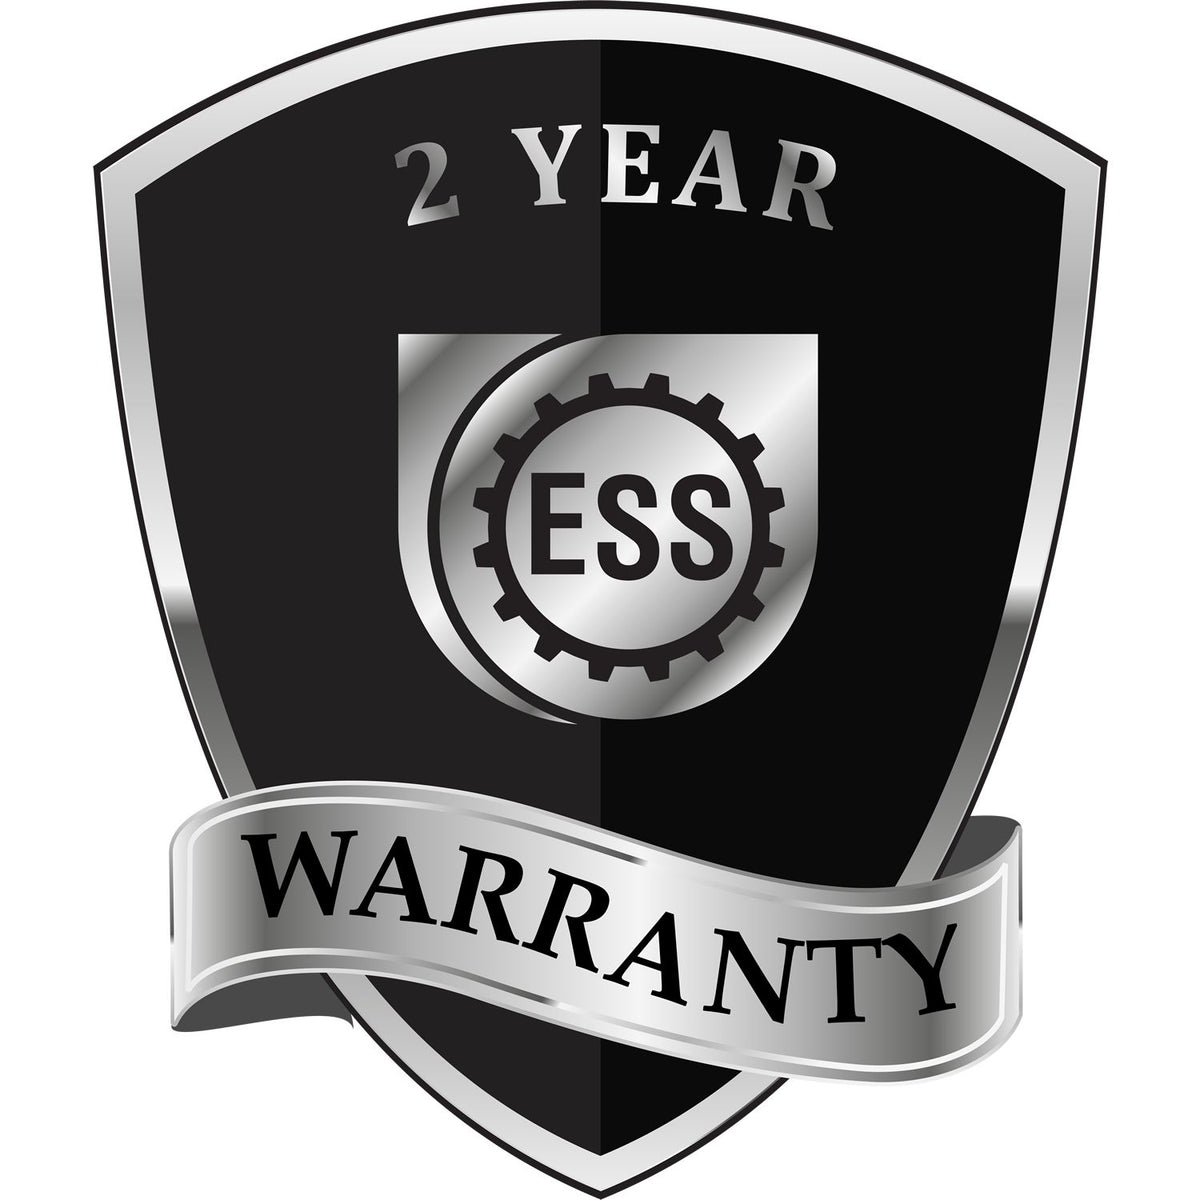 A black and silver badge or emblem showing warranty information for the Gift Wyoming Land Surveyor Seal